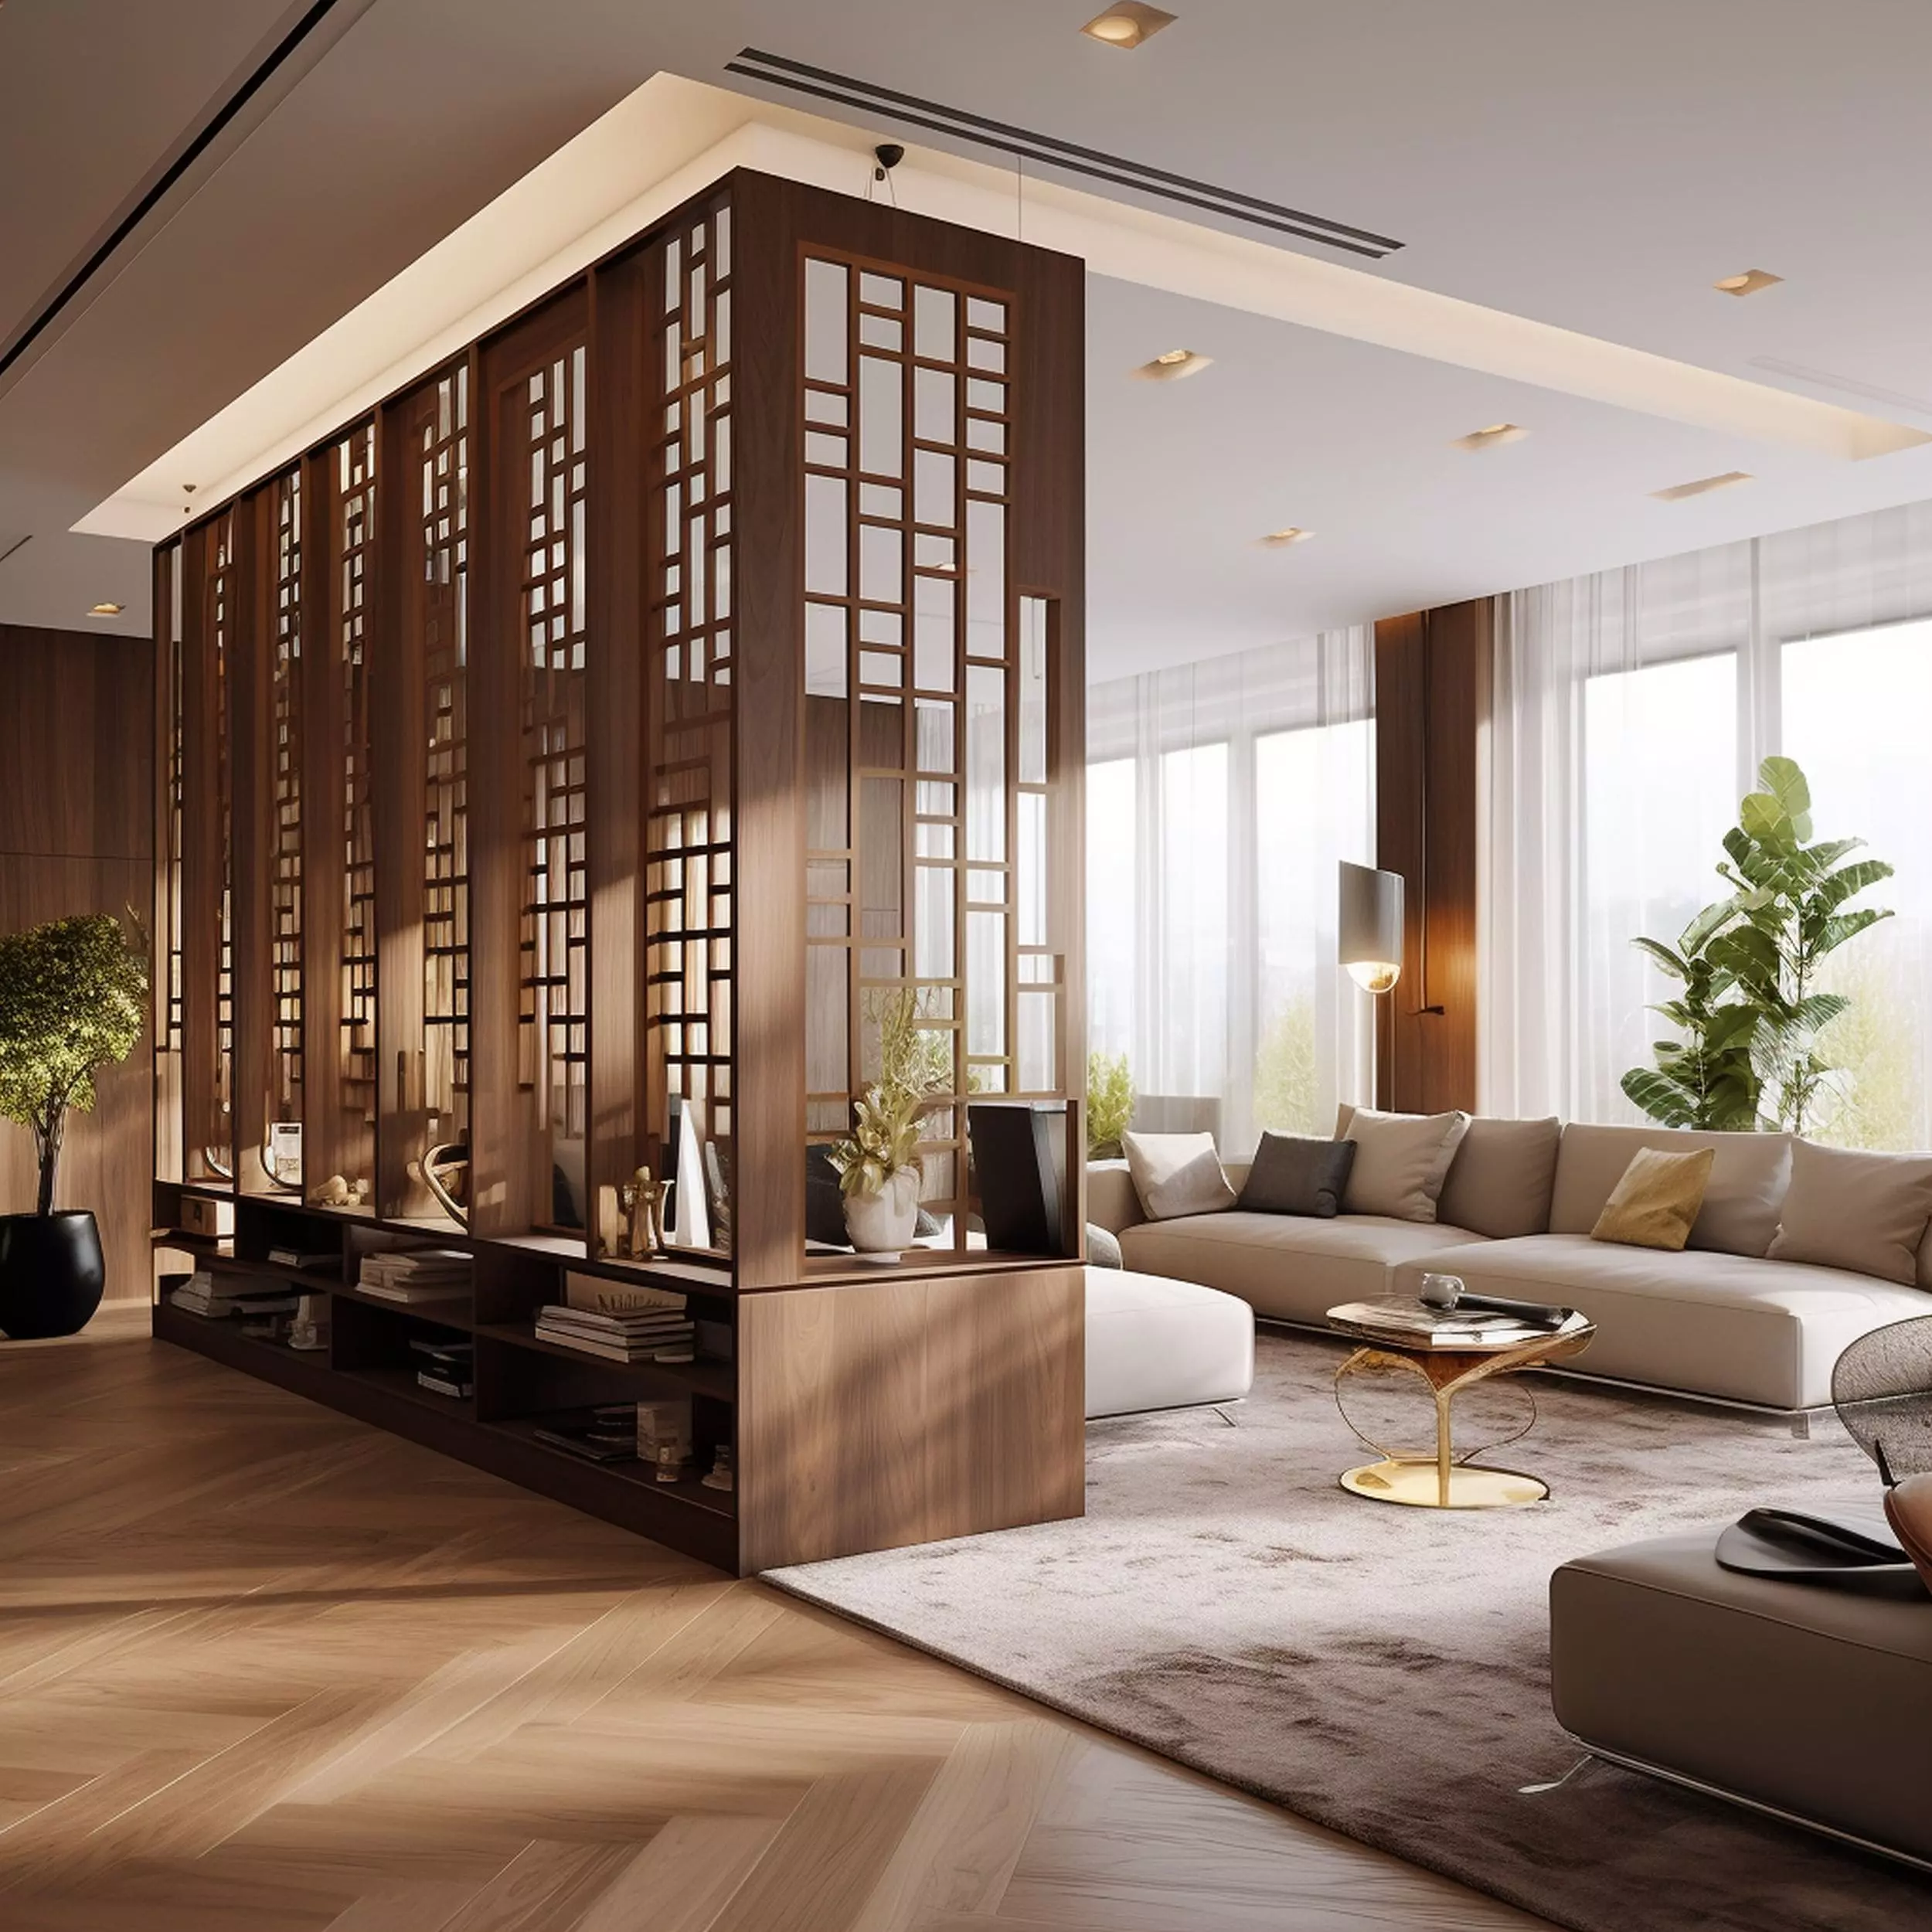 Stylish Room Divider in Living Room